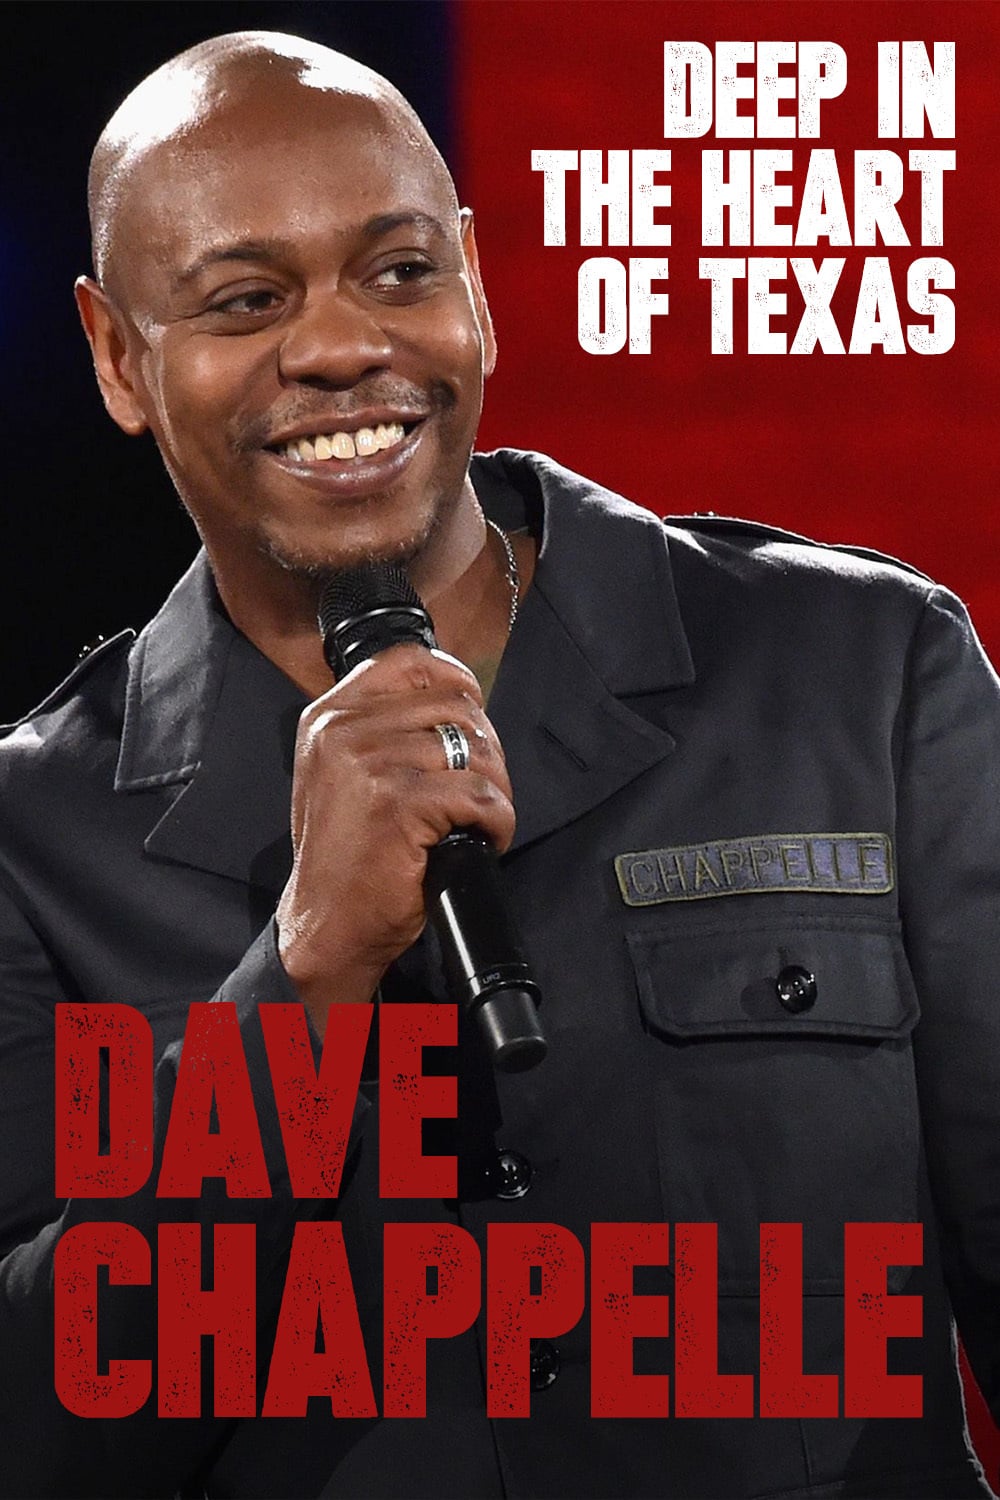 Caratula de DEEP IN THE HEART OF TEXAS: DAVE CHAPPELLE LIVE AT AUSTIN CITY LIMITS (Deep in the Heart of Texas: Dave Chappelle Live at Austin City Limits) 